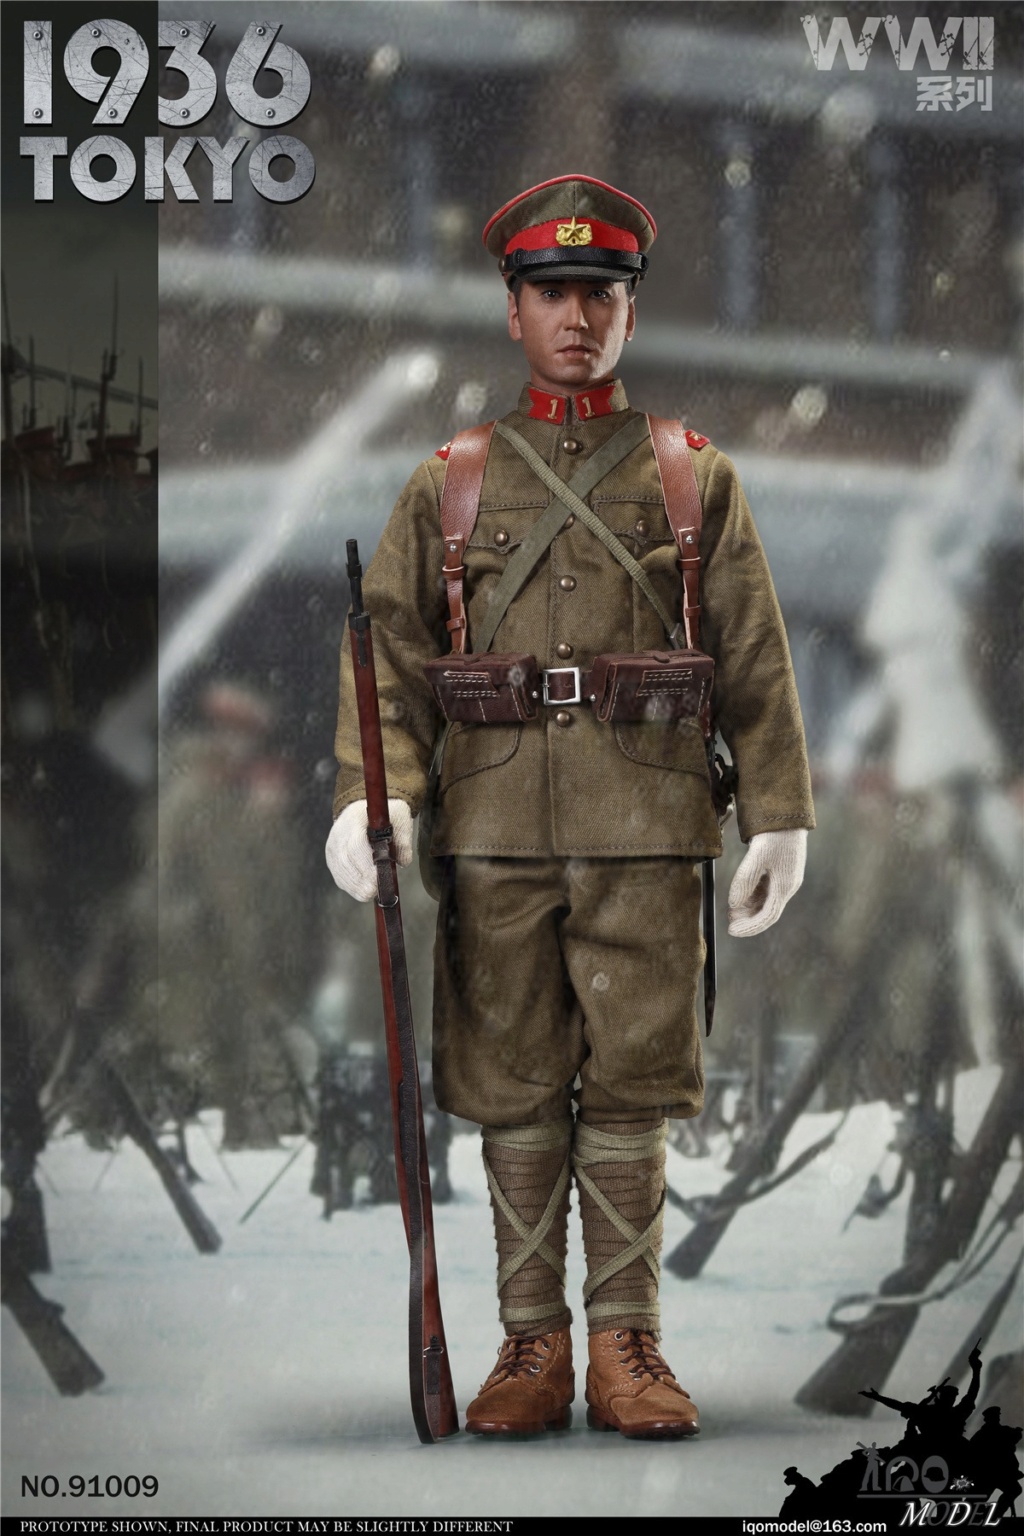 NEW PRODUCT: IQO Model: 1/6 WWII Series 1936 Tokyo (NO.91009) 15463711